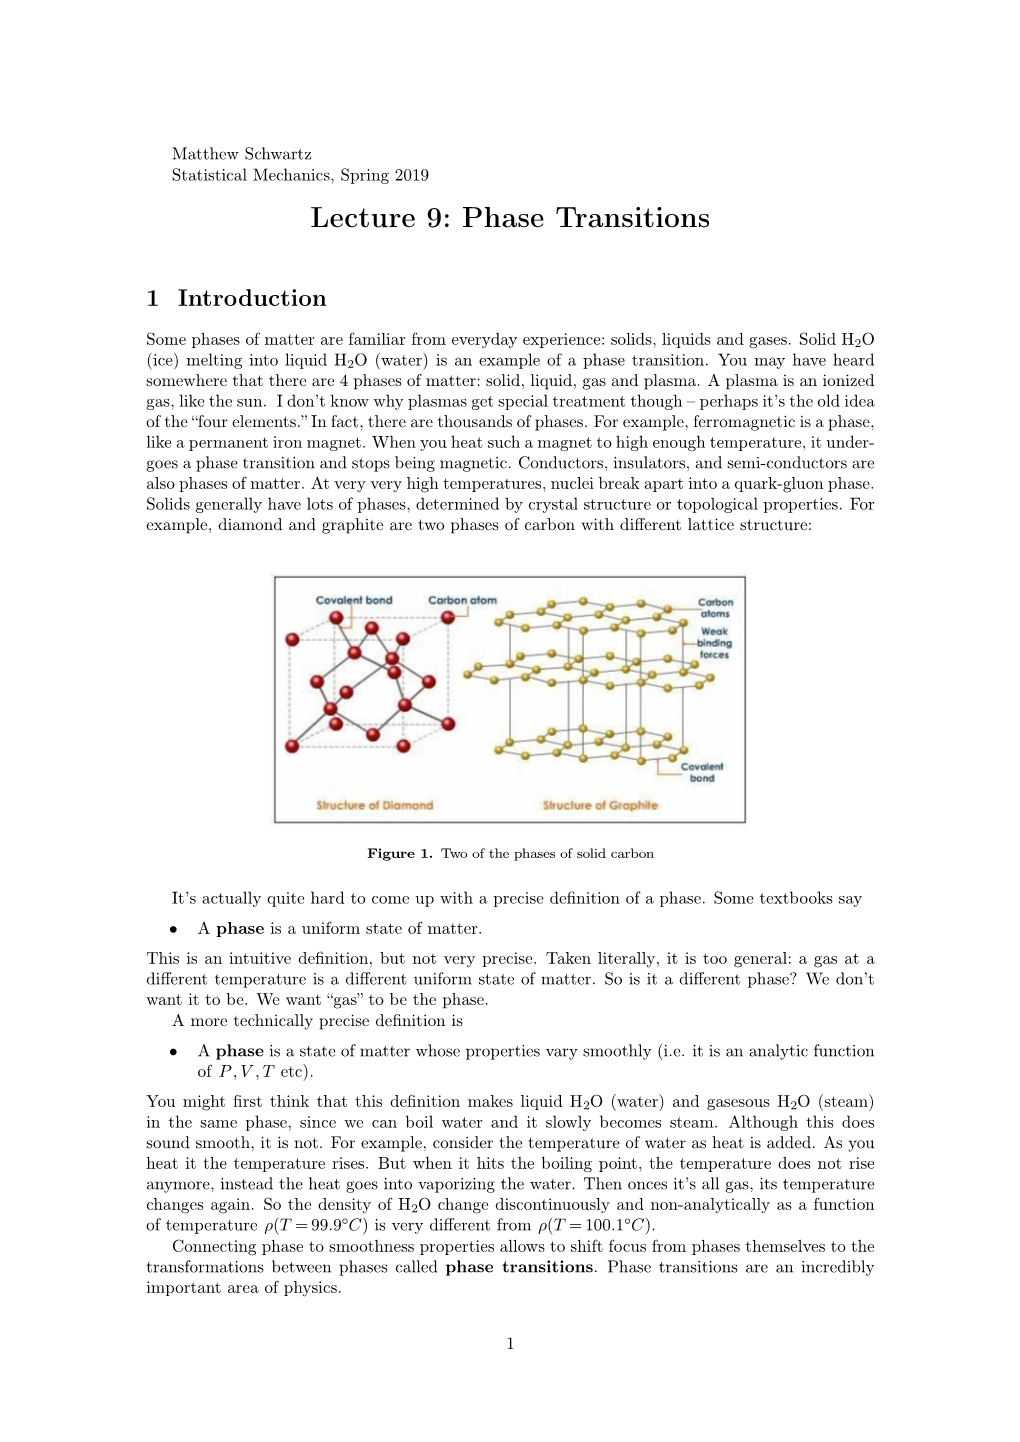 Lecture 9: Phase Transitions